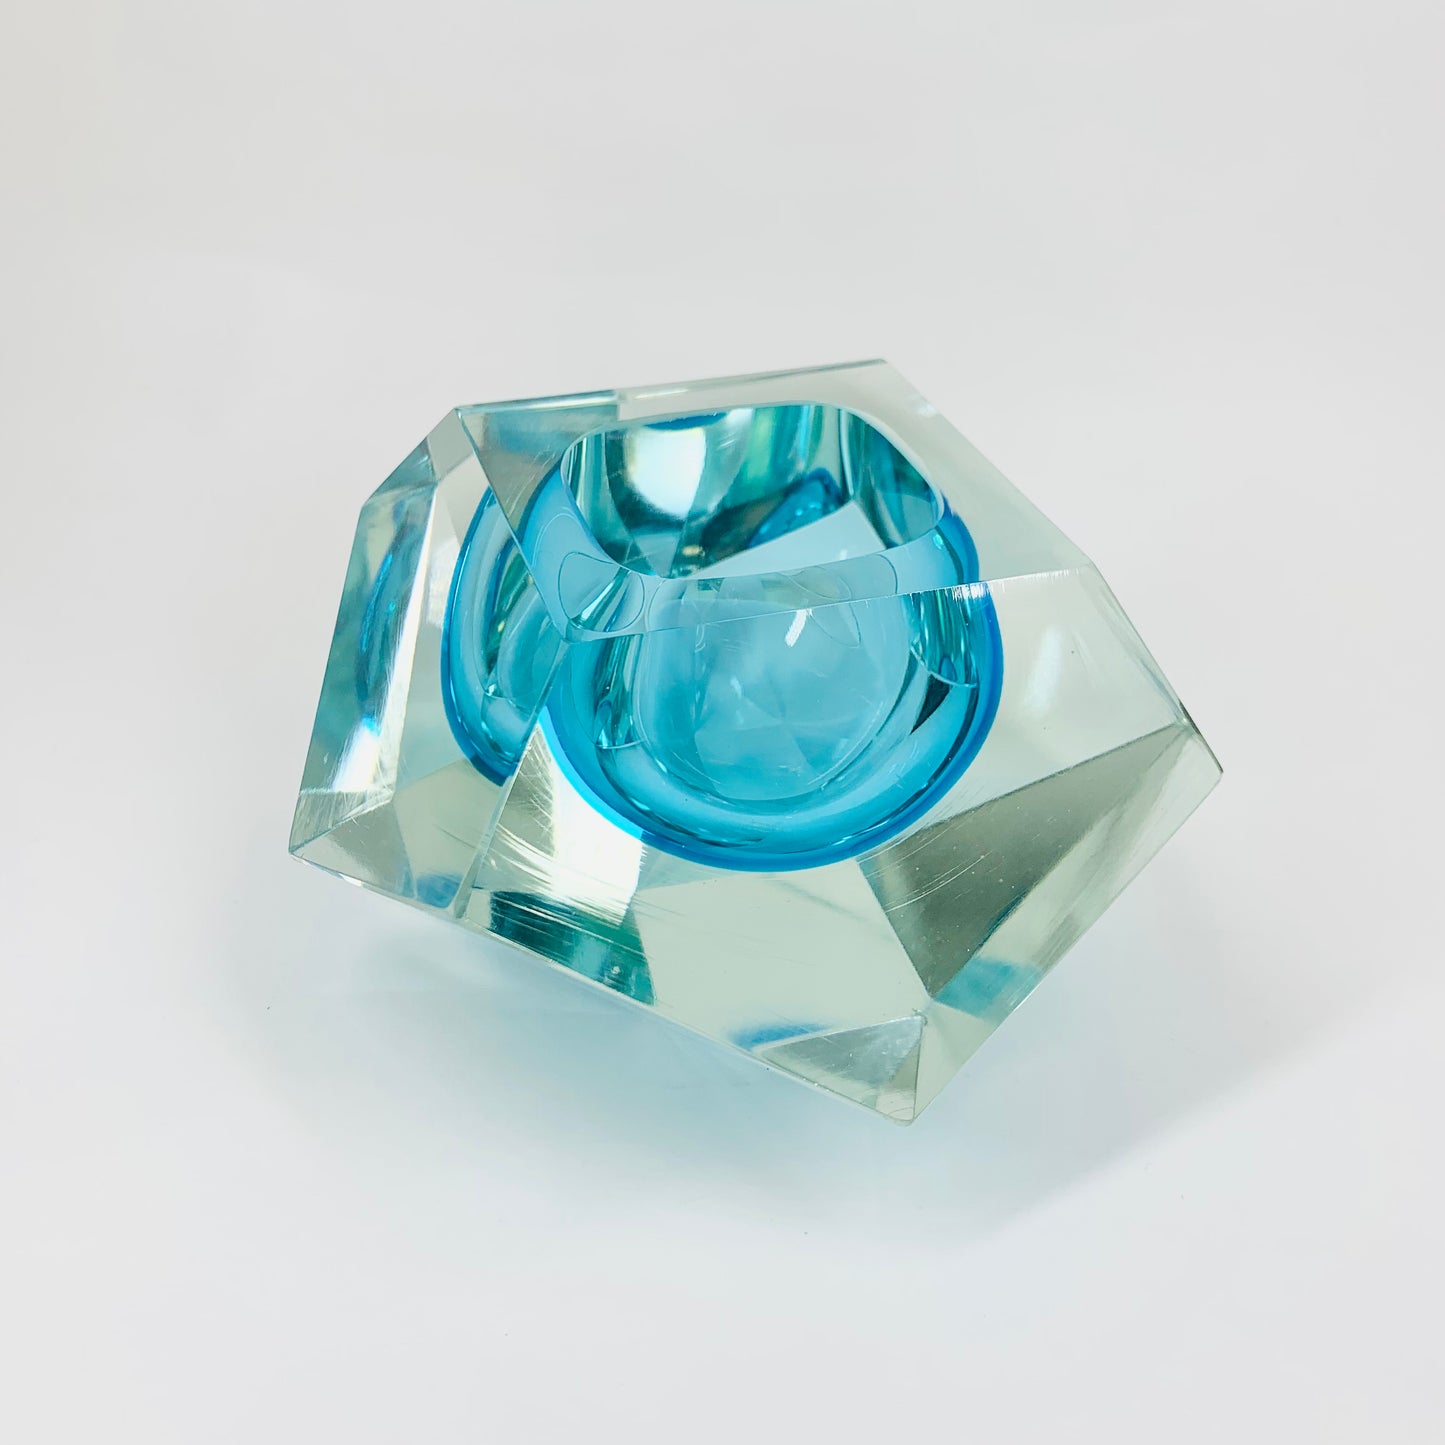 Extremely rare MCM blue Murano Sommerso faceted glass geode bowl by Mandruzatto